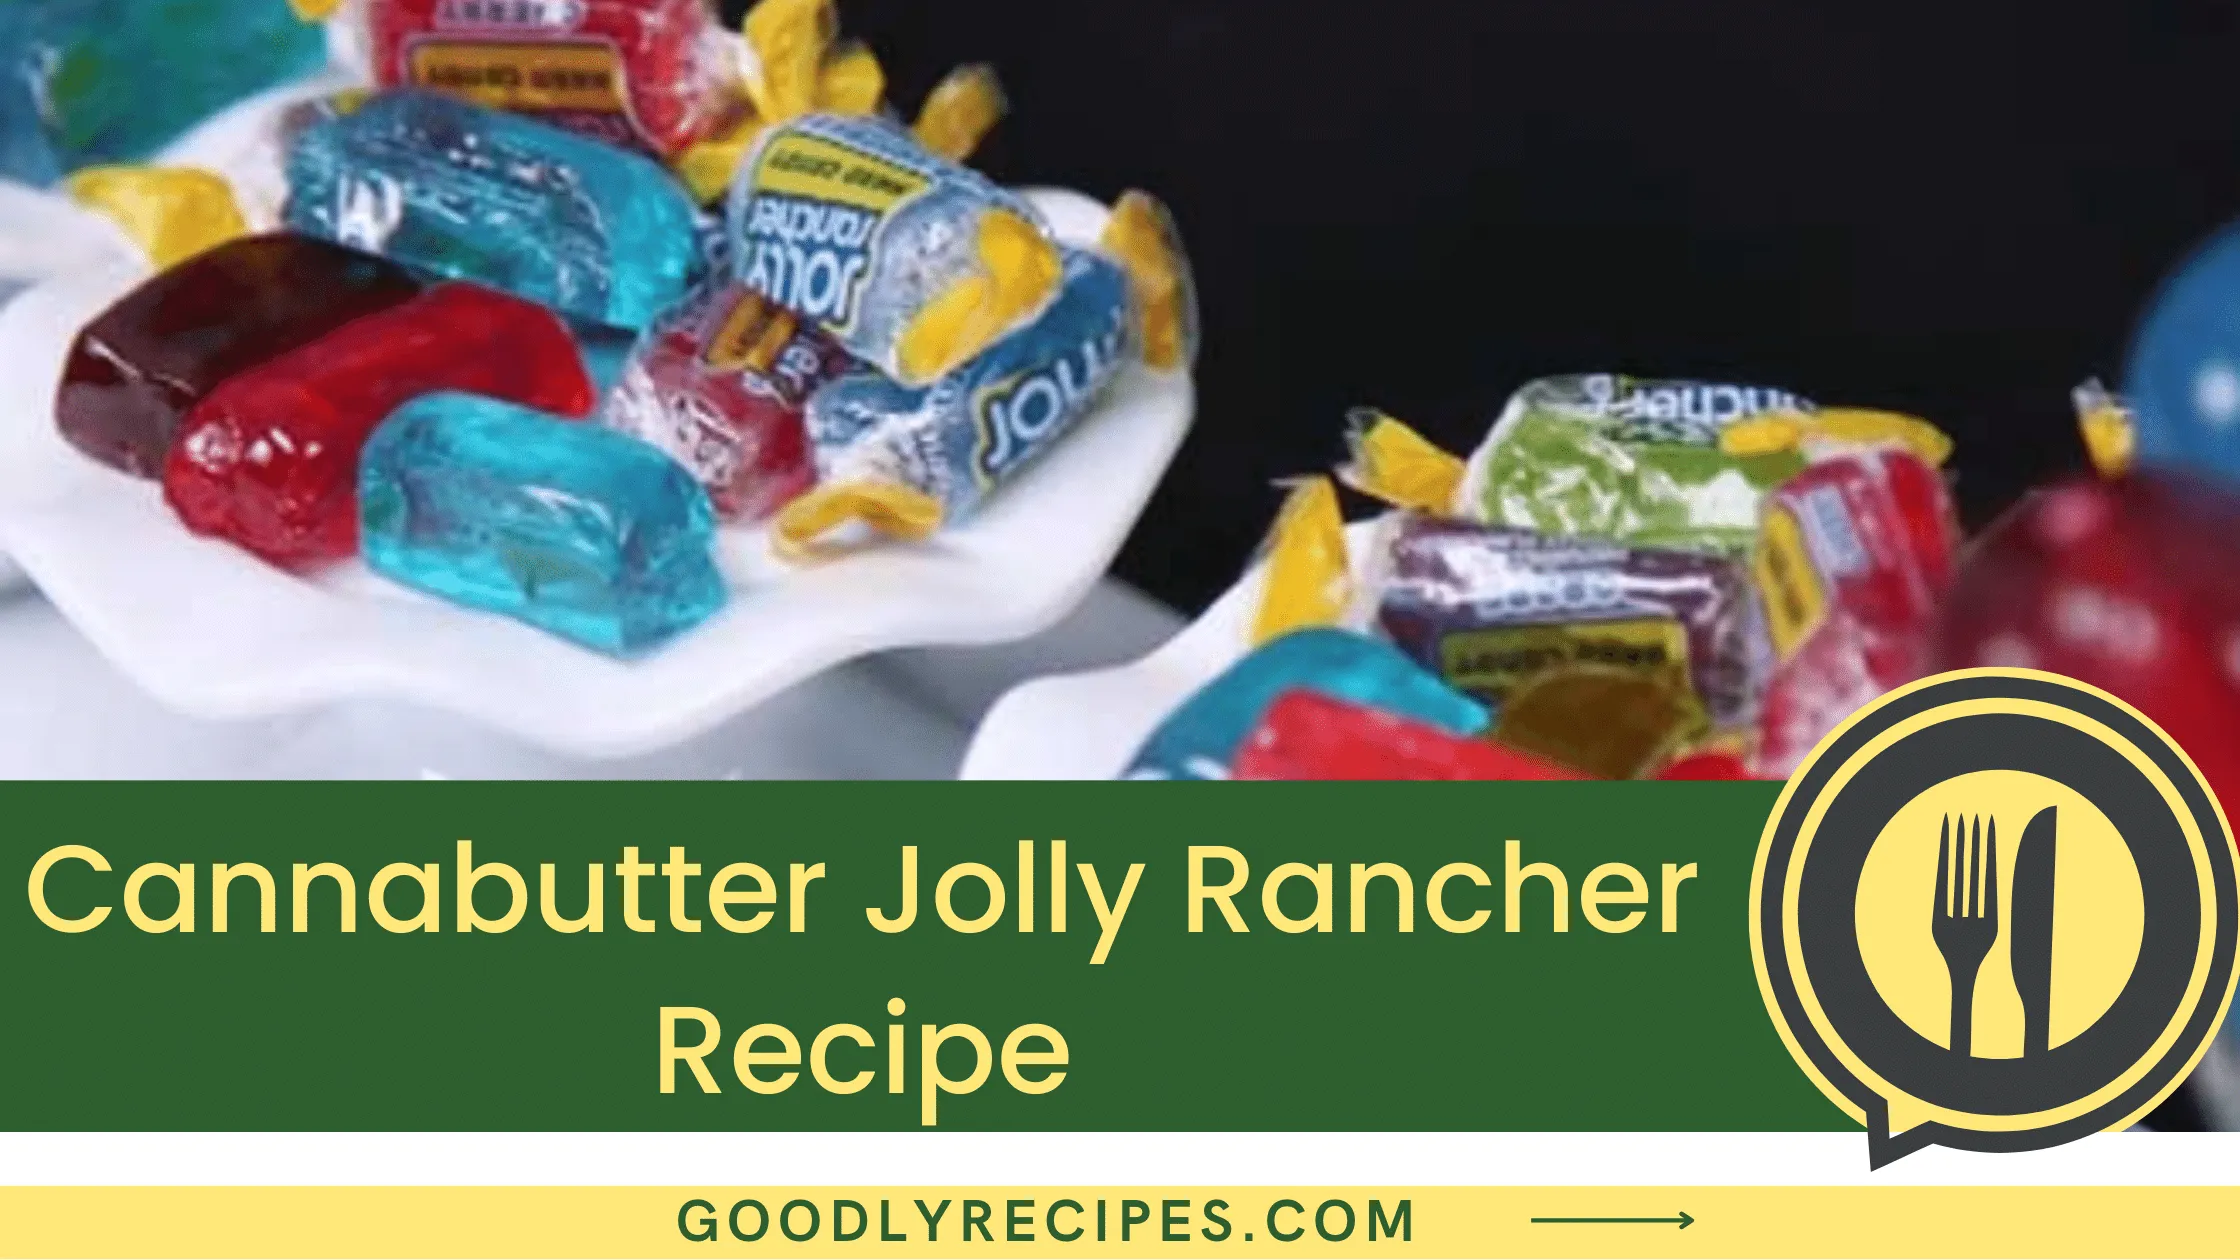 What is Cannabutter Jolly Rancher Recipe?